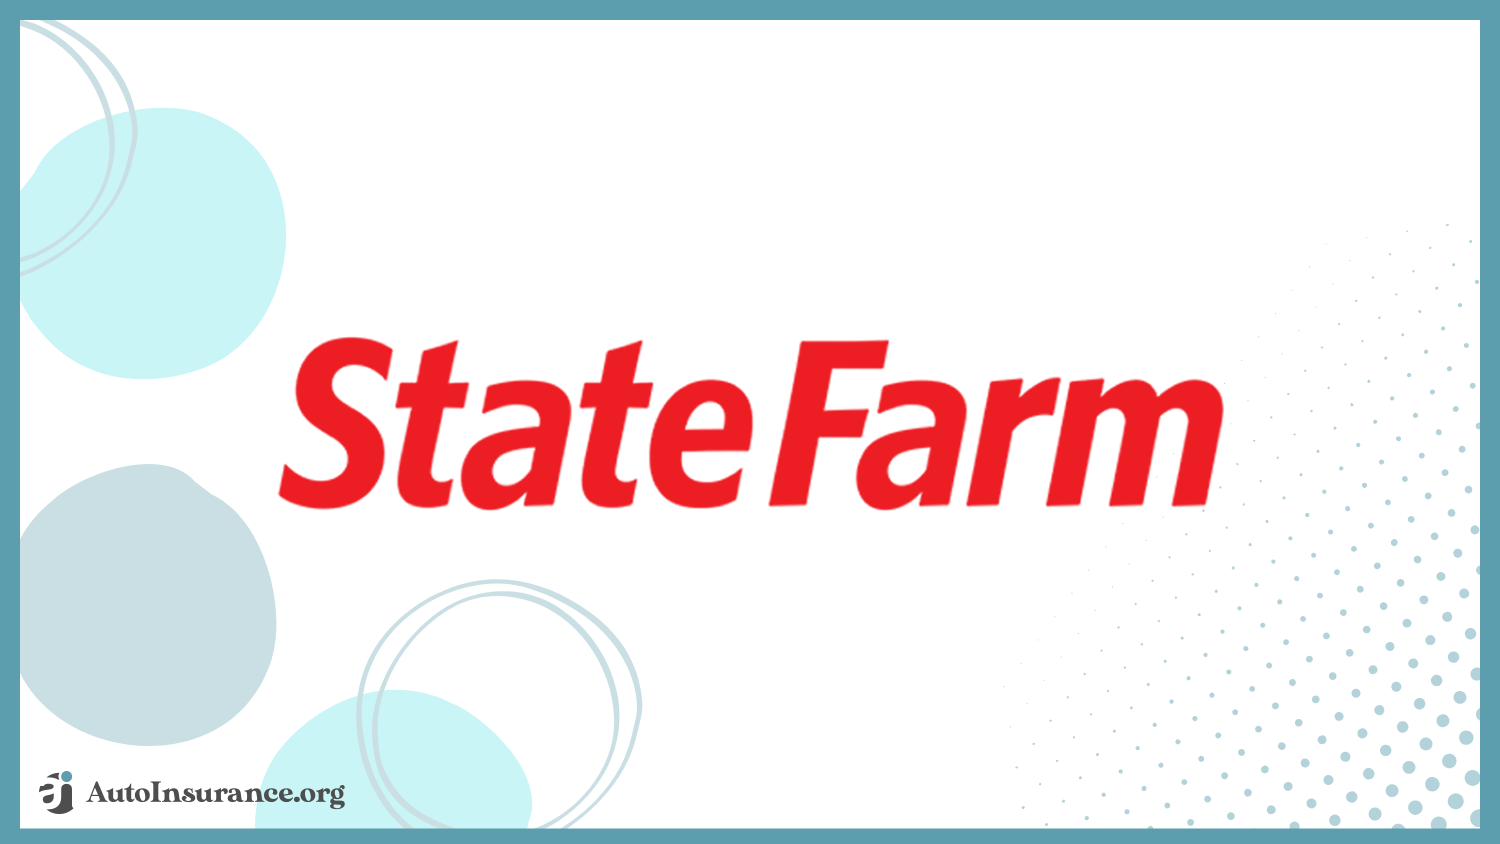 State Farm best auto insurance companies that offer cash back for safe drivers